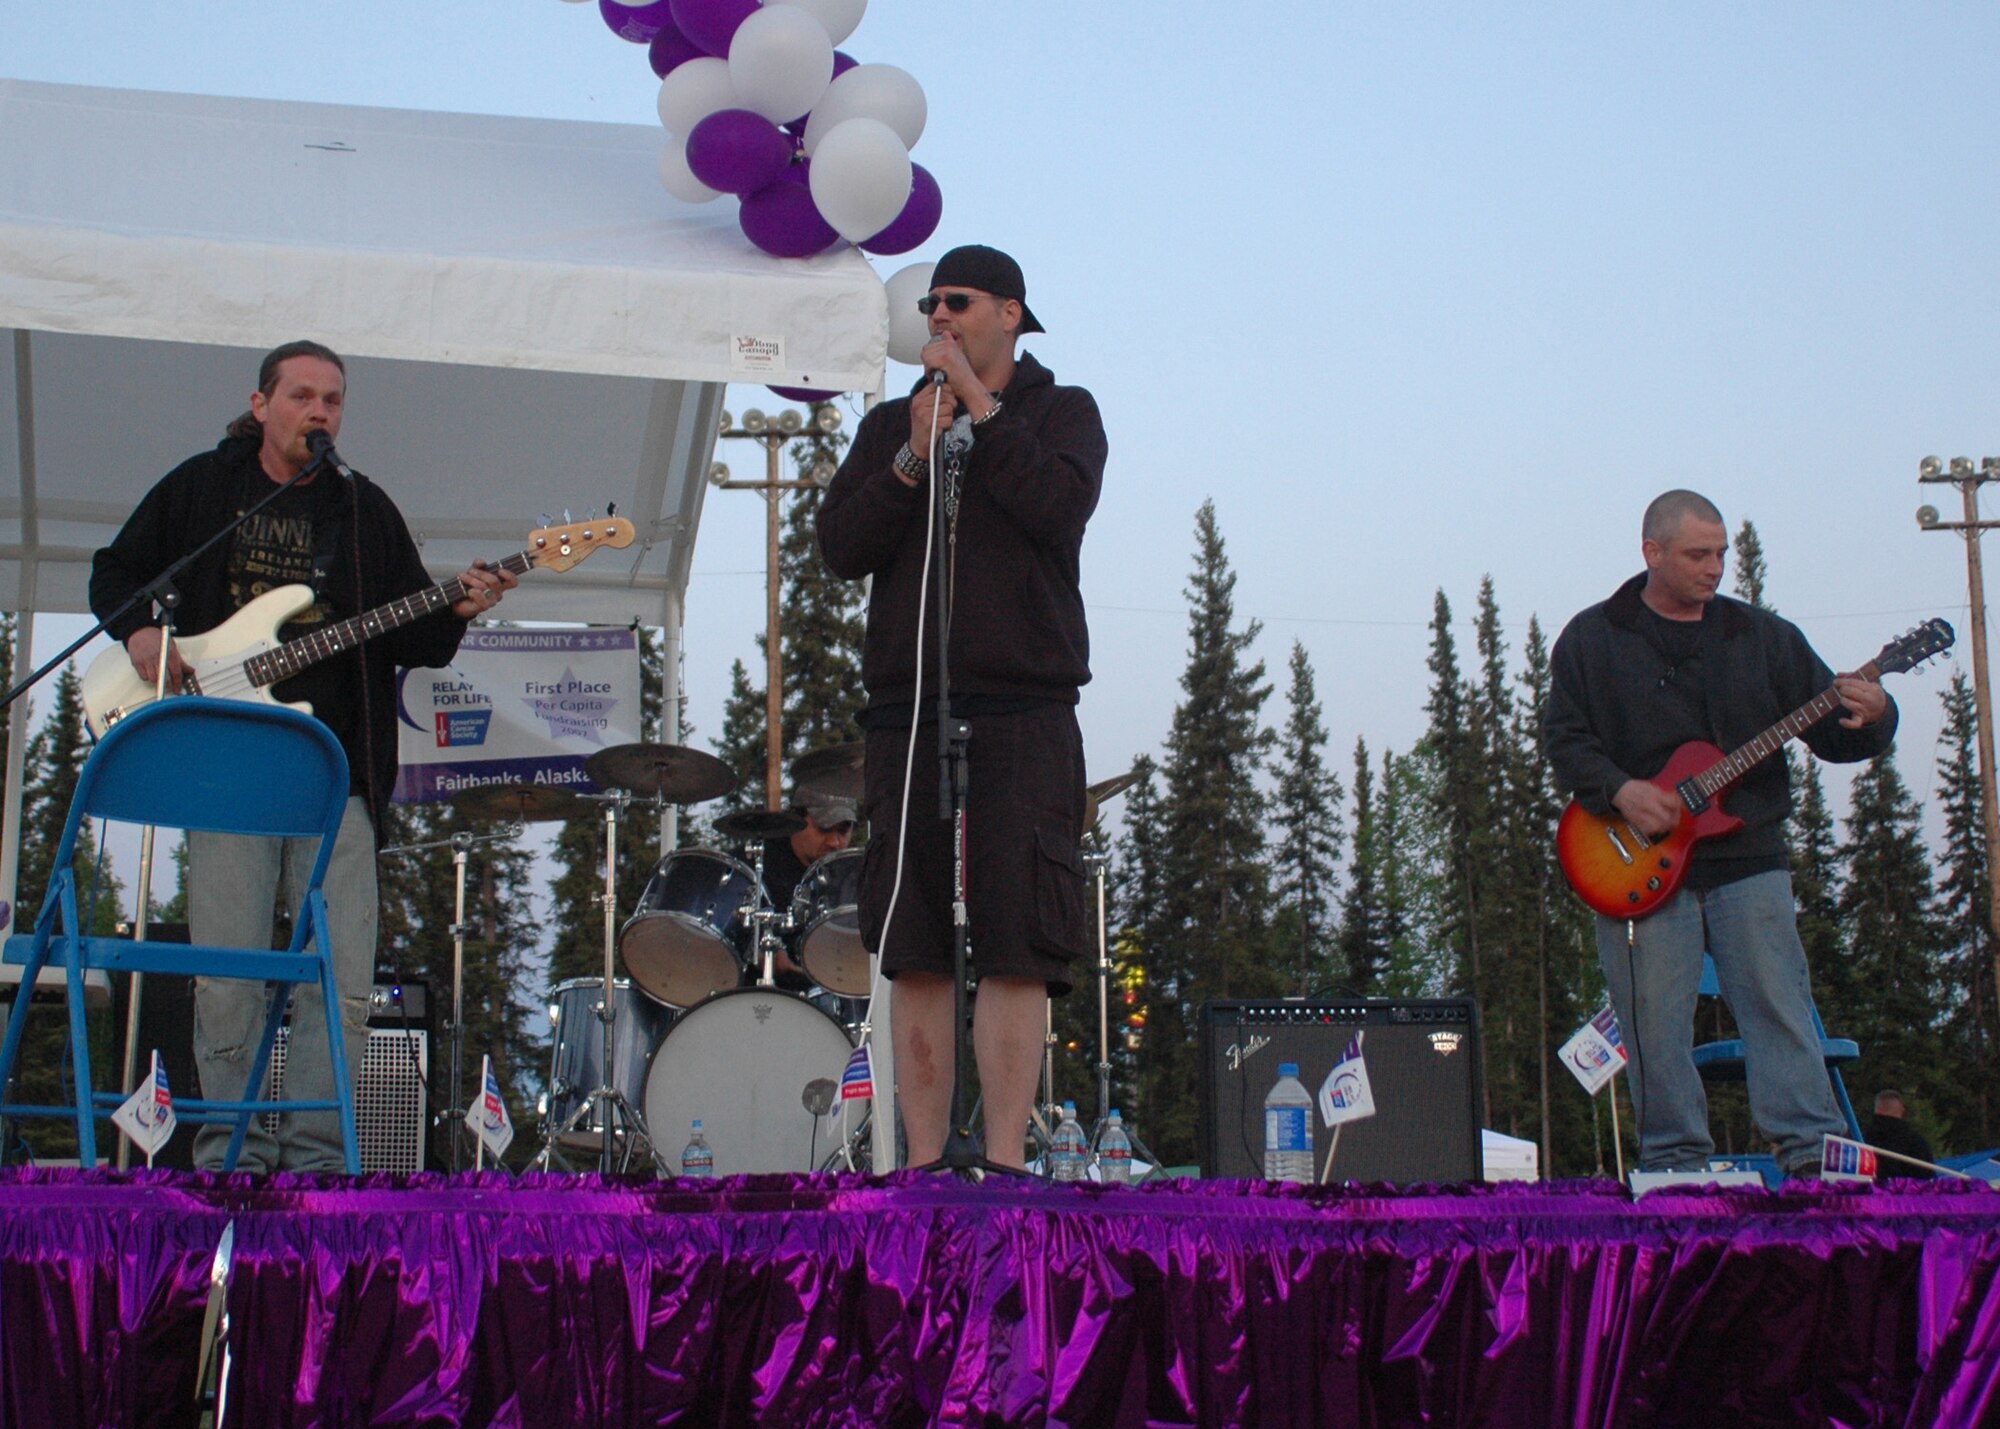 Tech. Sgt. John Kehres, 354th Aircraft Maintenance Squadron weapons crew chief, (far right) plays guitar with his band, Dystopia, at a cancer benefit May 31, 2008, at the West Valley High School in Fairbanks. Sergeant Kehres and his band mates, brothers Justin (vocals) and Rob Smith (bass guitar), and Mitch Higgins (drums), met in 1992 during Sergeant Kehre?s first tour at Eielson. In 1999 Sergeant Kehres got reassigned to Pope AFB, N.C., but came back to Eielson afterwards and has been here with his family ever since. (U.S. Air Force photo by Airman 1st Class Nora Anton)